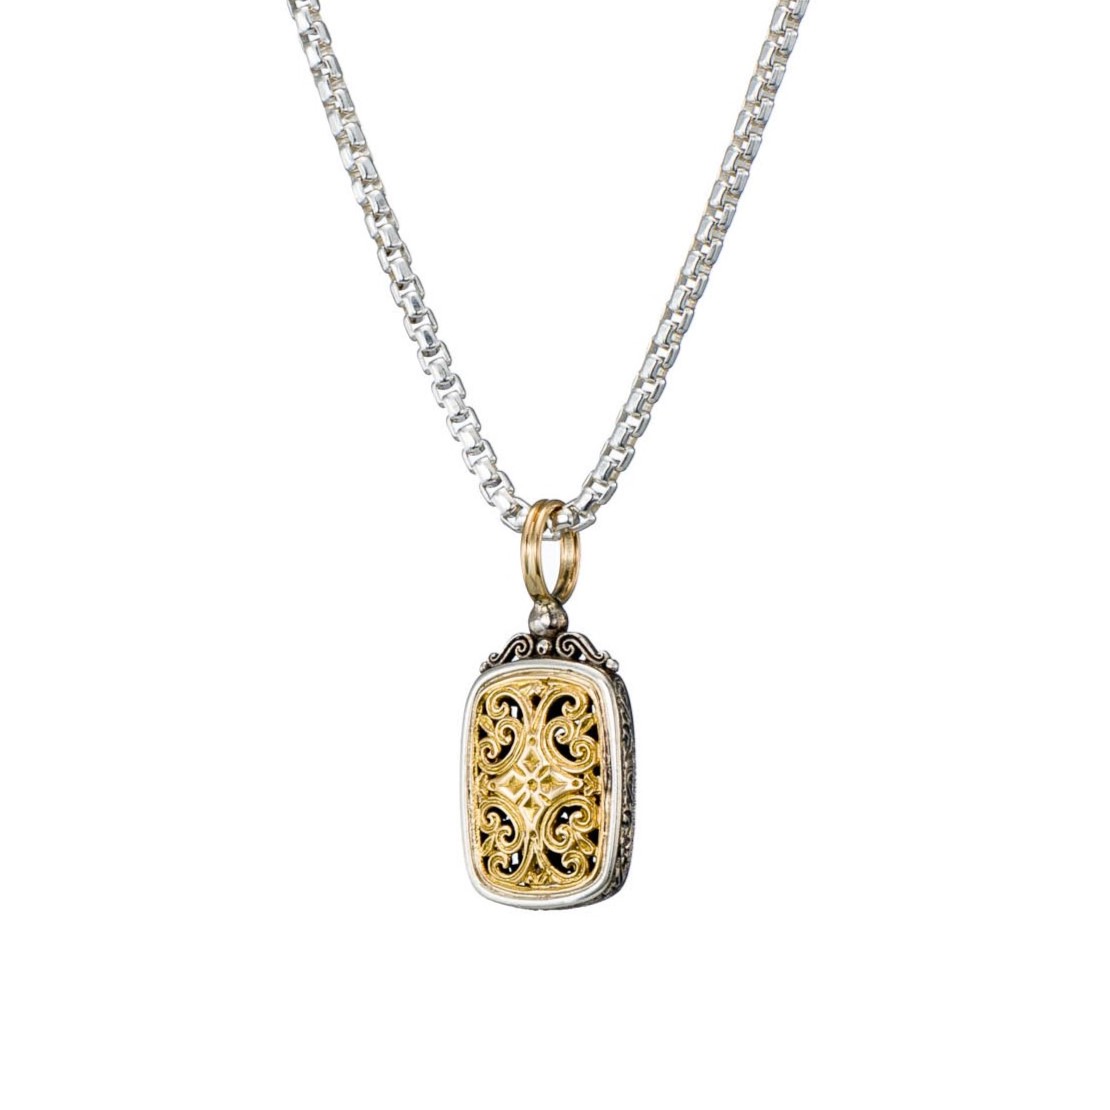 Mediterranean Cushion Pendant in 18K Gold and Sterling Silver